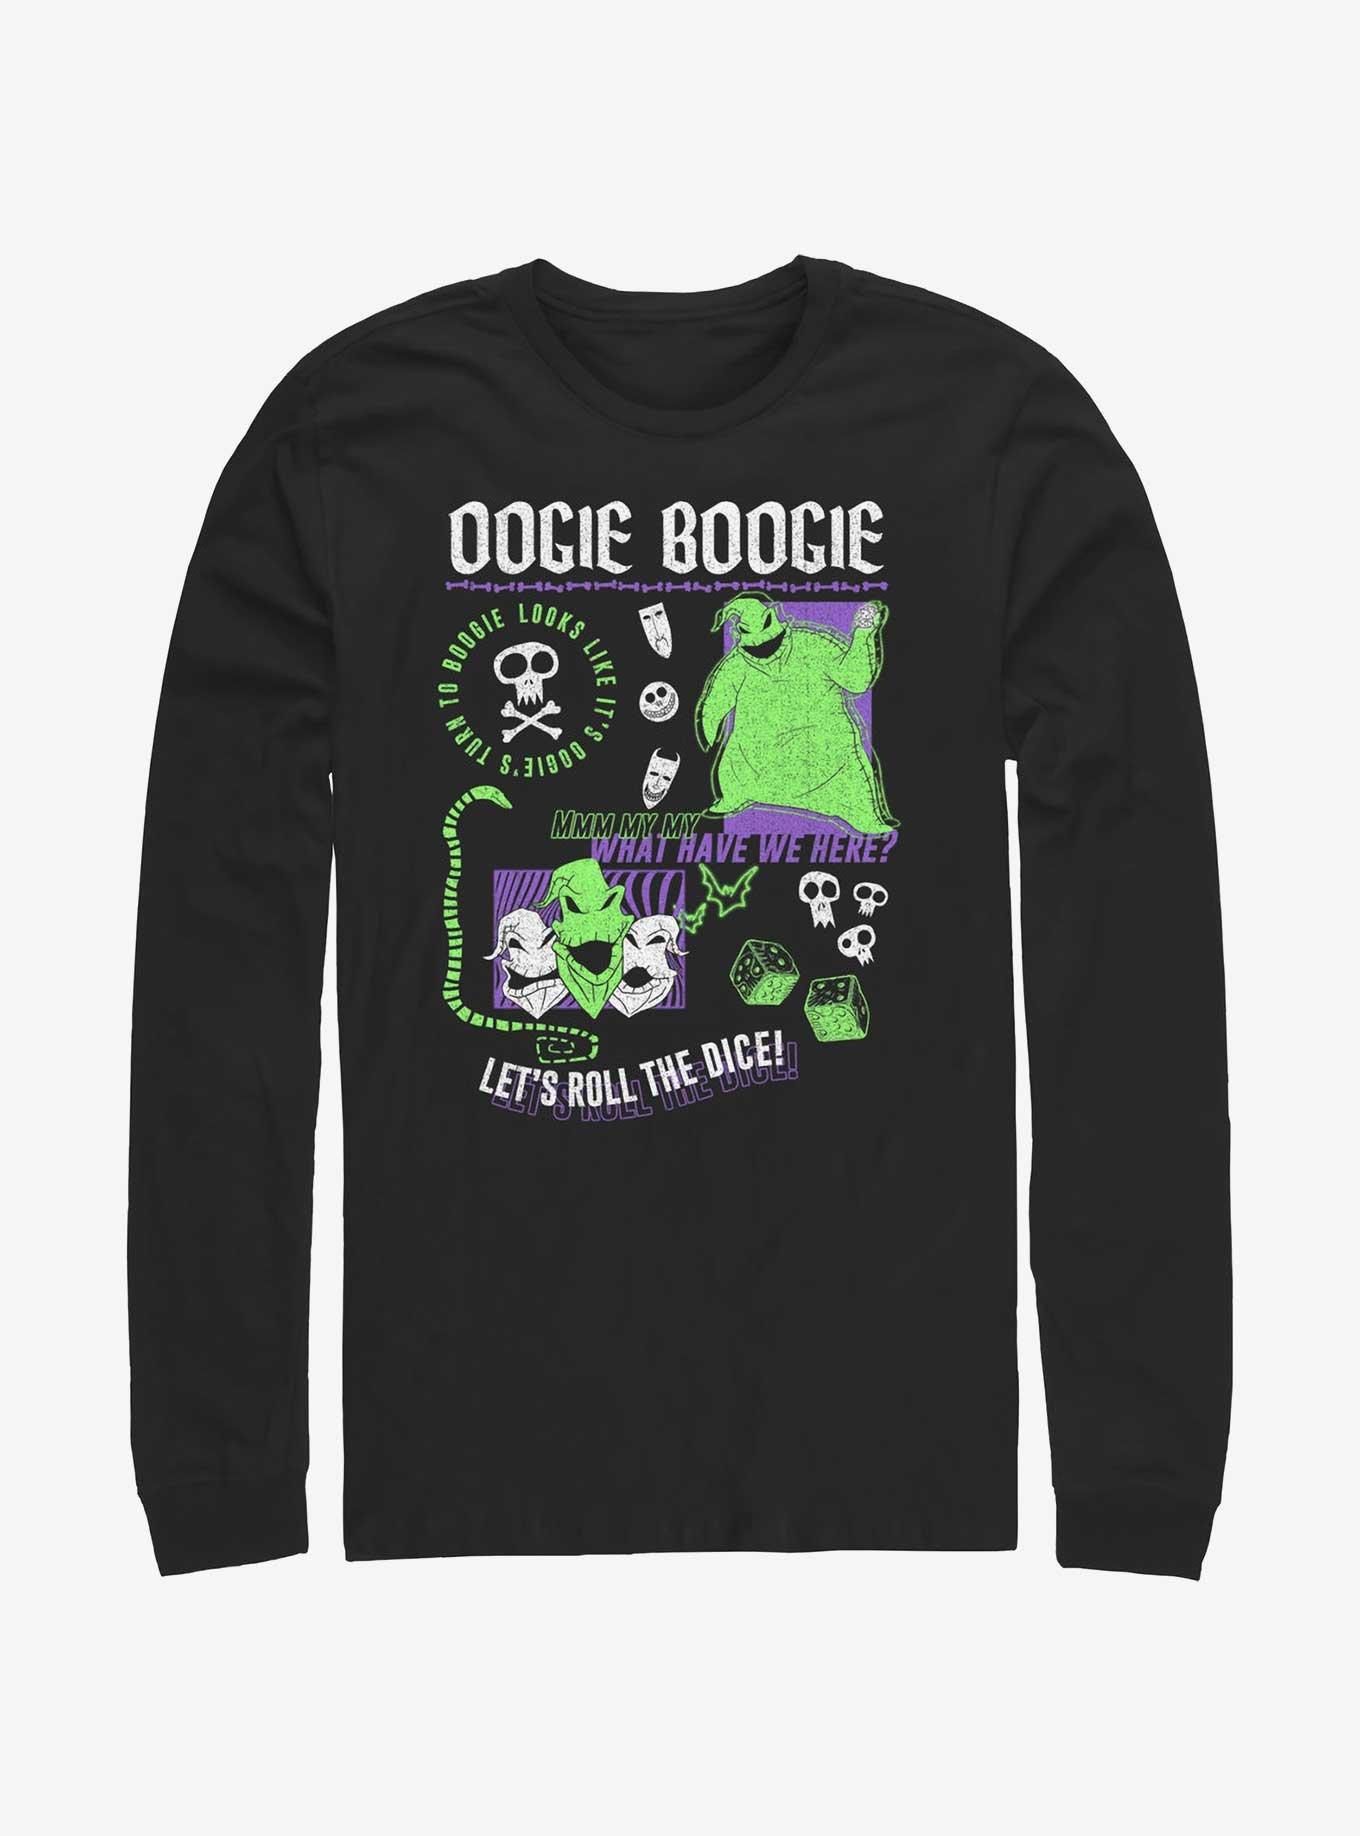 Disney The Nightmare Before Christmas Oogie Boogie Let's Roll The Dice Long-Sleeve T-Shirt, BLACK, hi-res